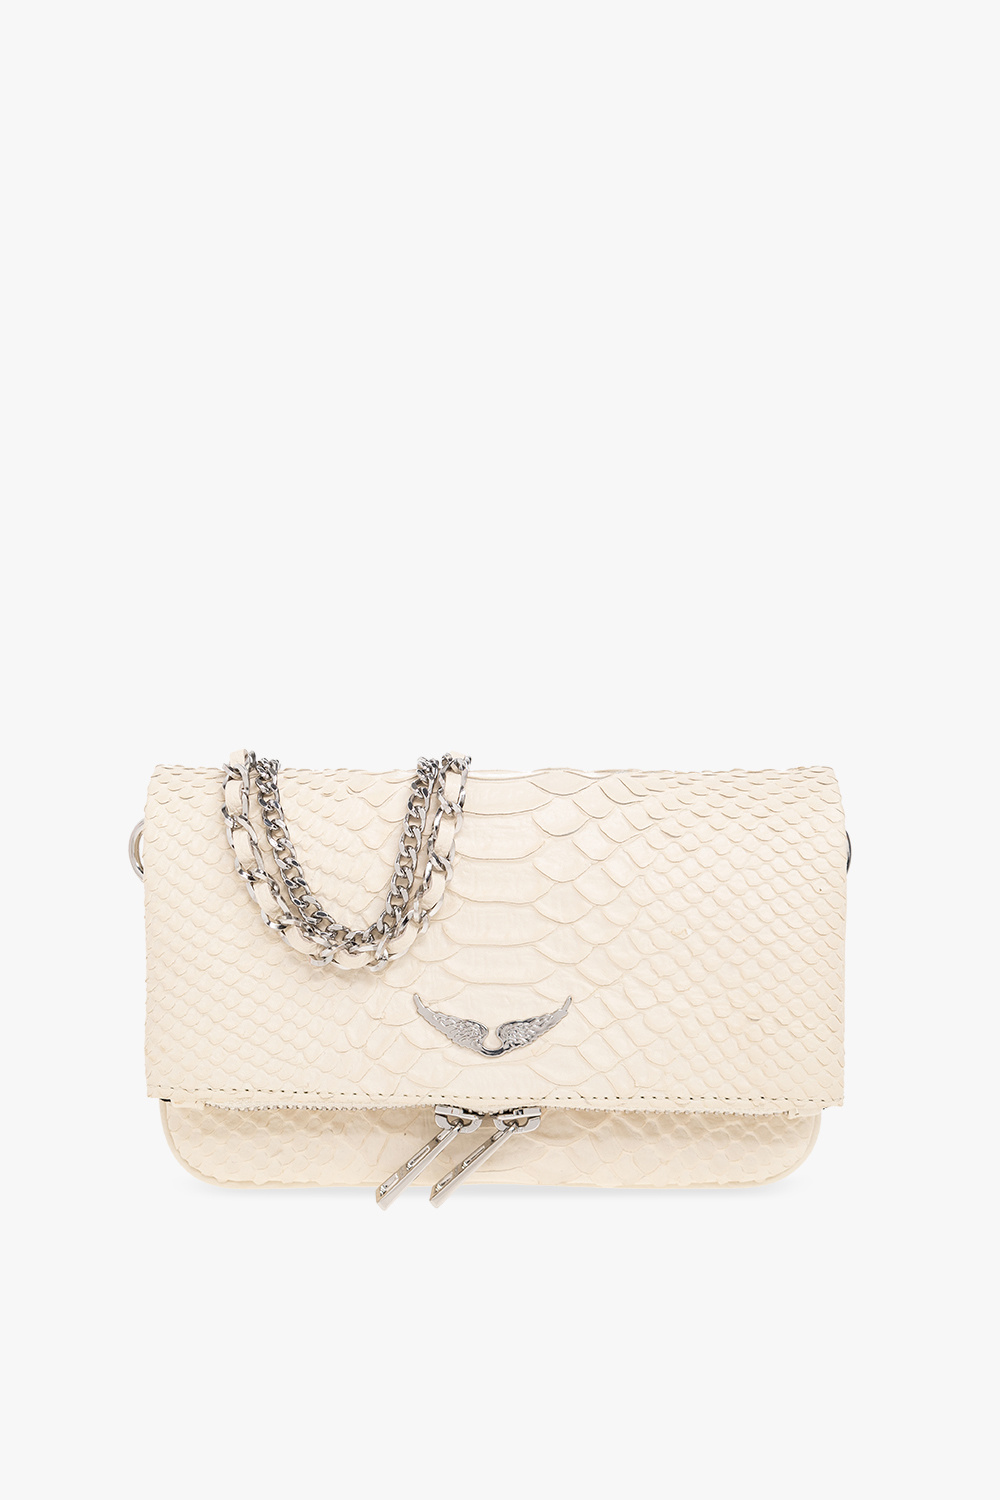 ZADIG & VOLTAIRE: Rock Nano bag in leather with python print - White